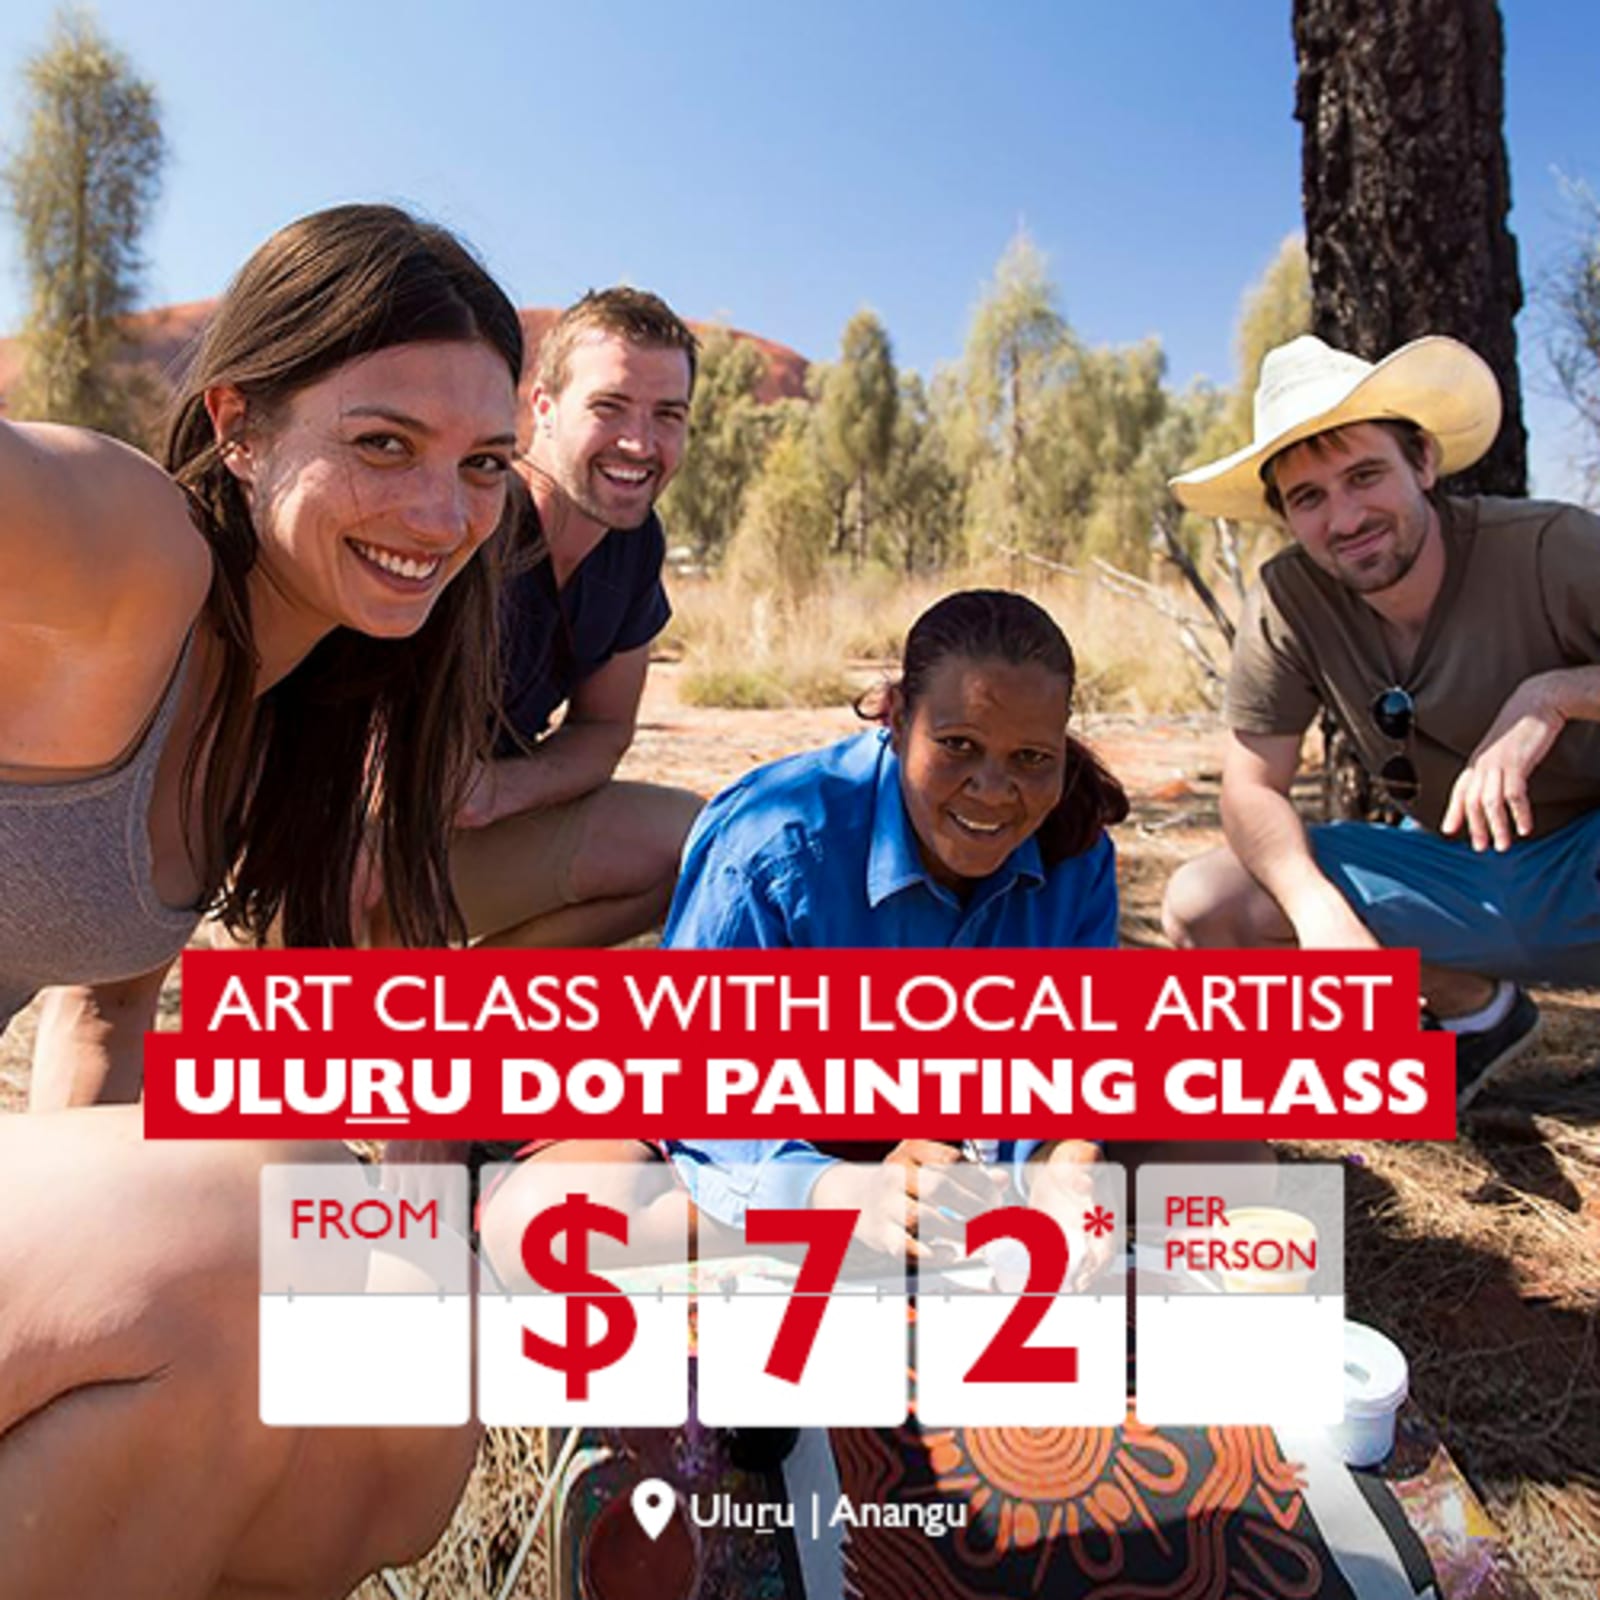 Art Class with local artist | Uluru dot painting class from $72* per person